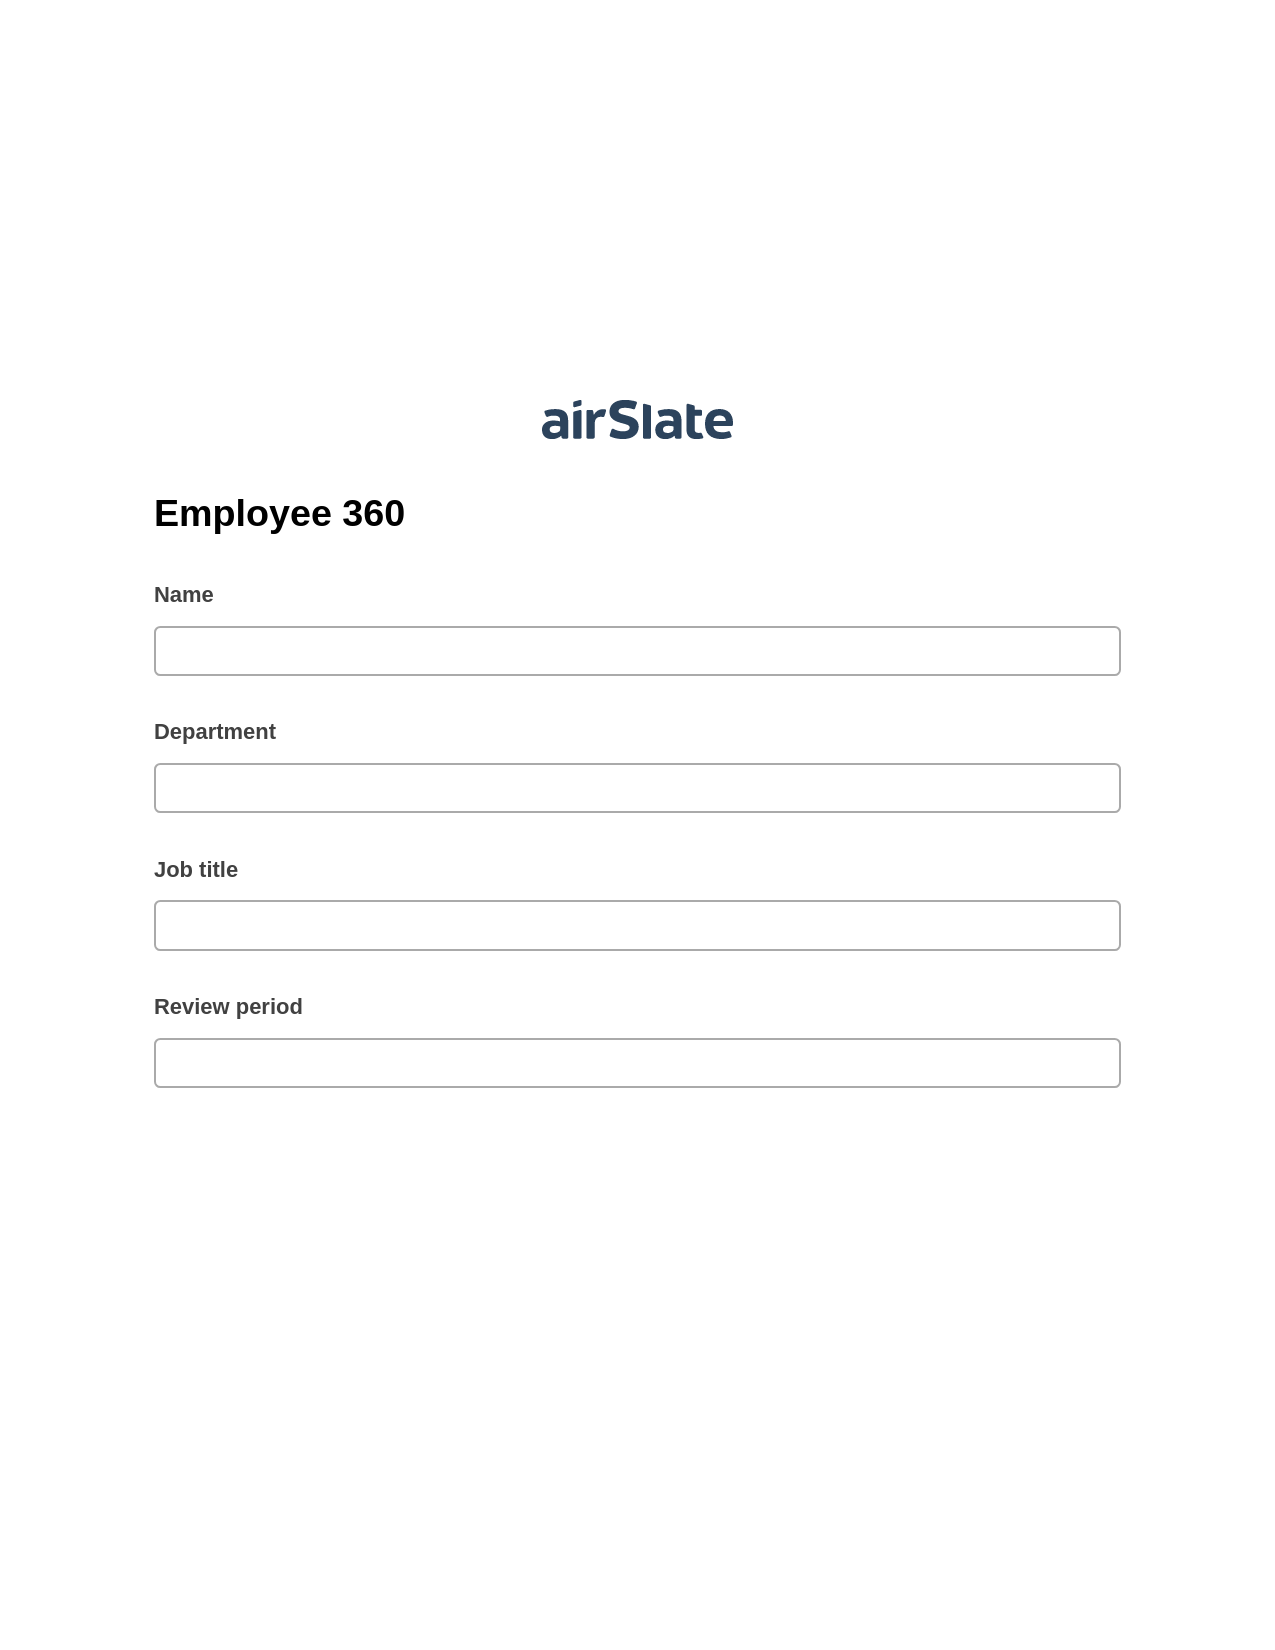 Employee 360 Prefill from NetSuite records, Export to MS Dynamics 365 Bot, Archive to Google Drive Bot